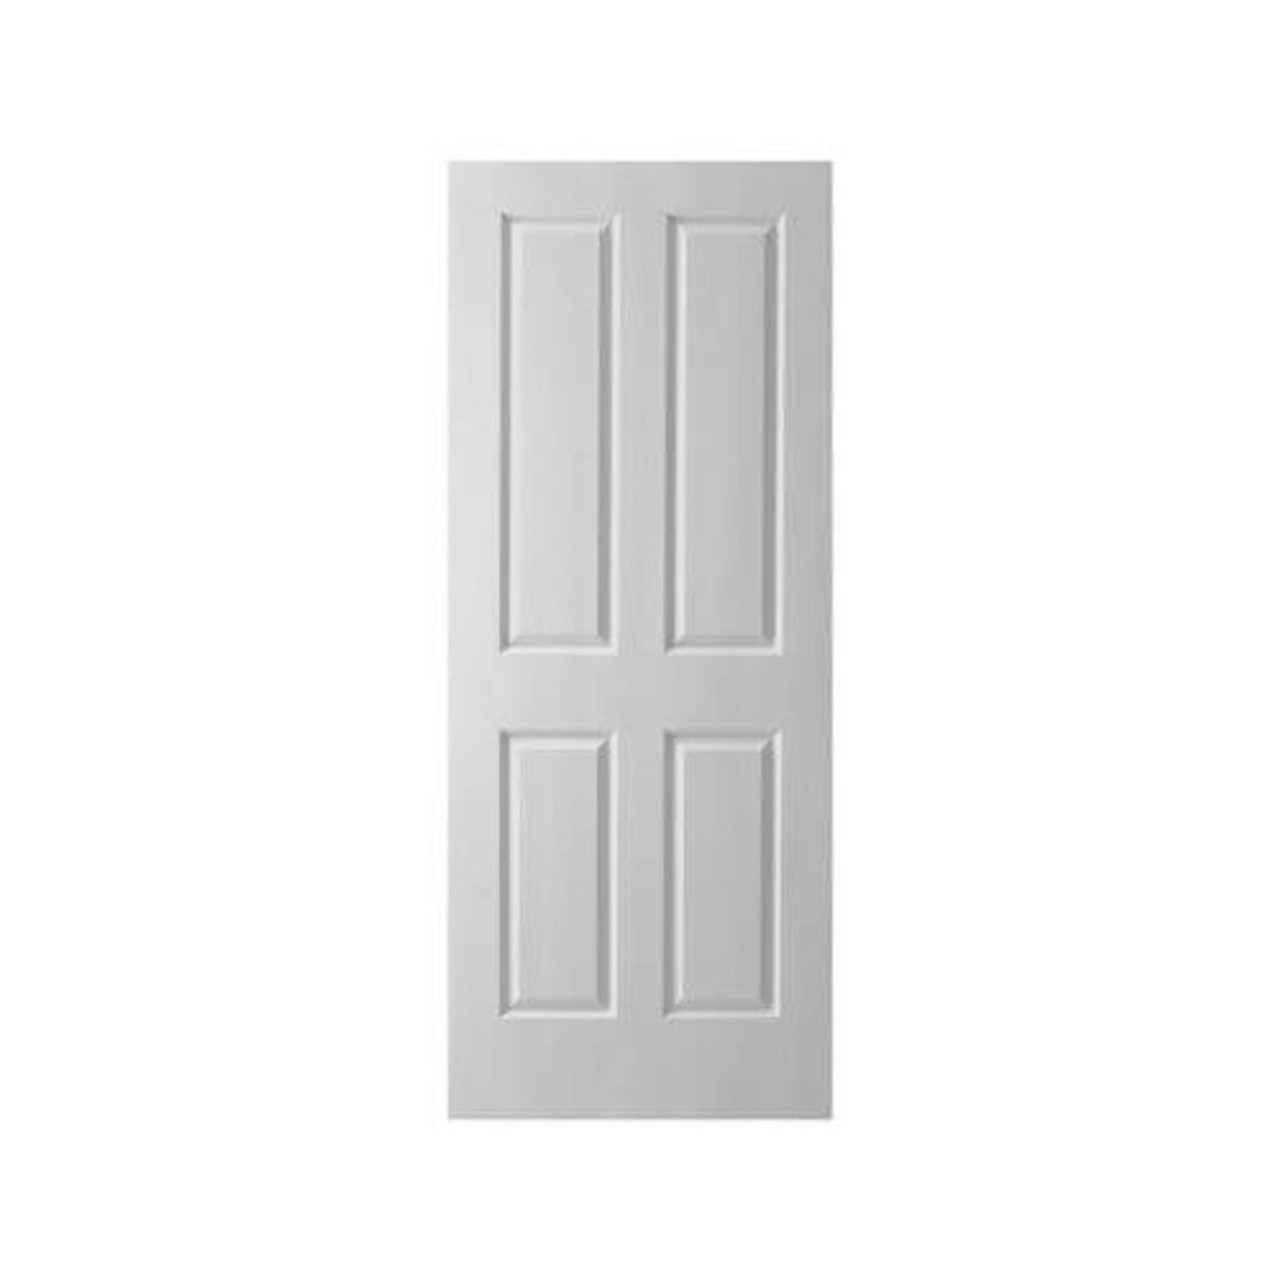 Hume Doors & Timber Hume Oakfield Moulded Panel Woodgrain 4 Panel Hollowcore Door 